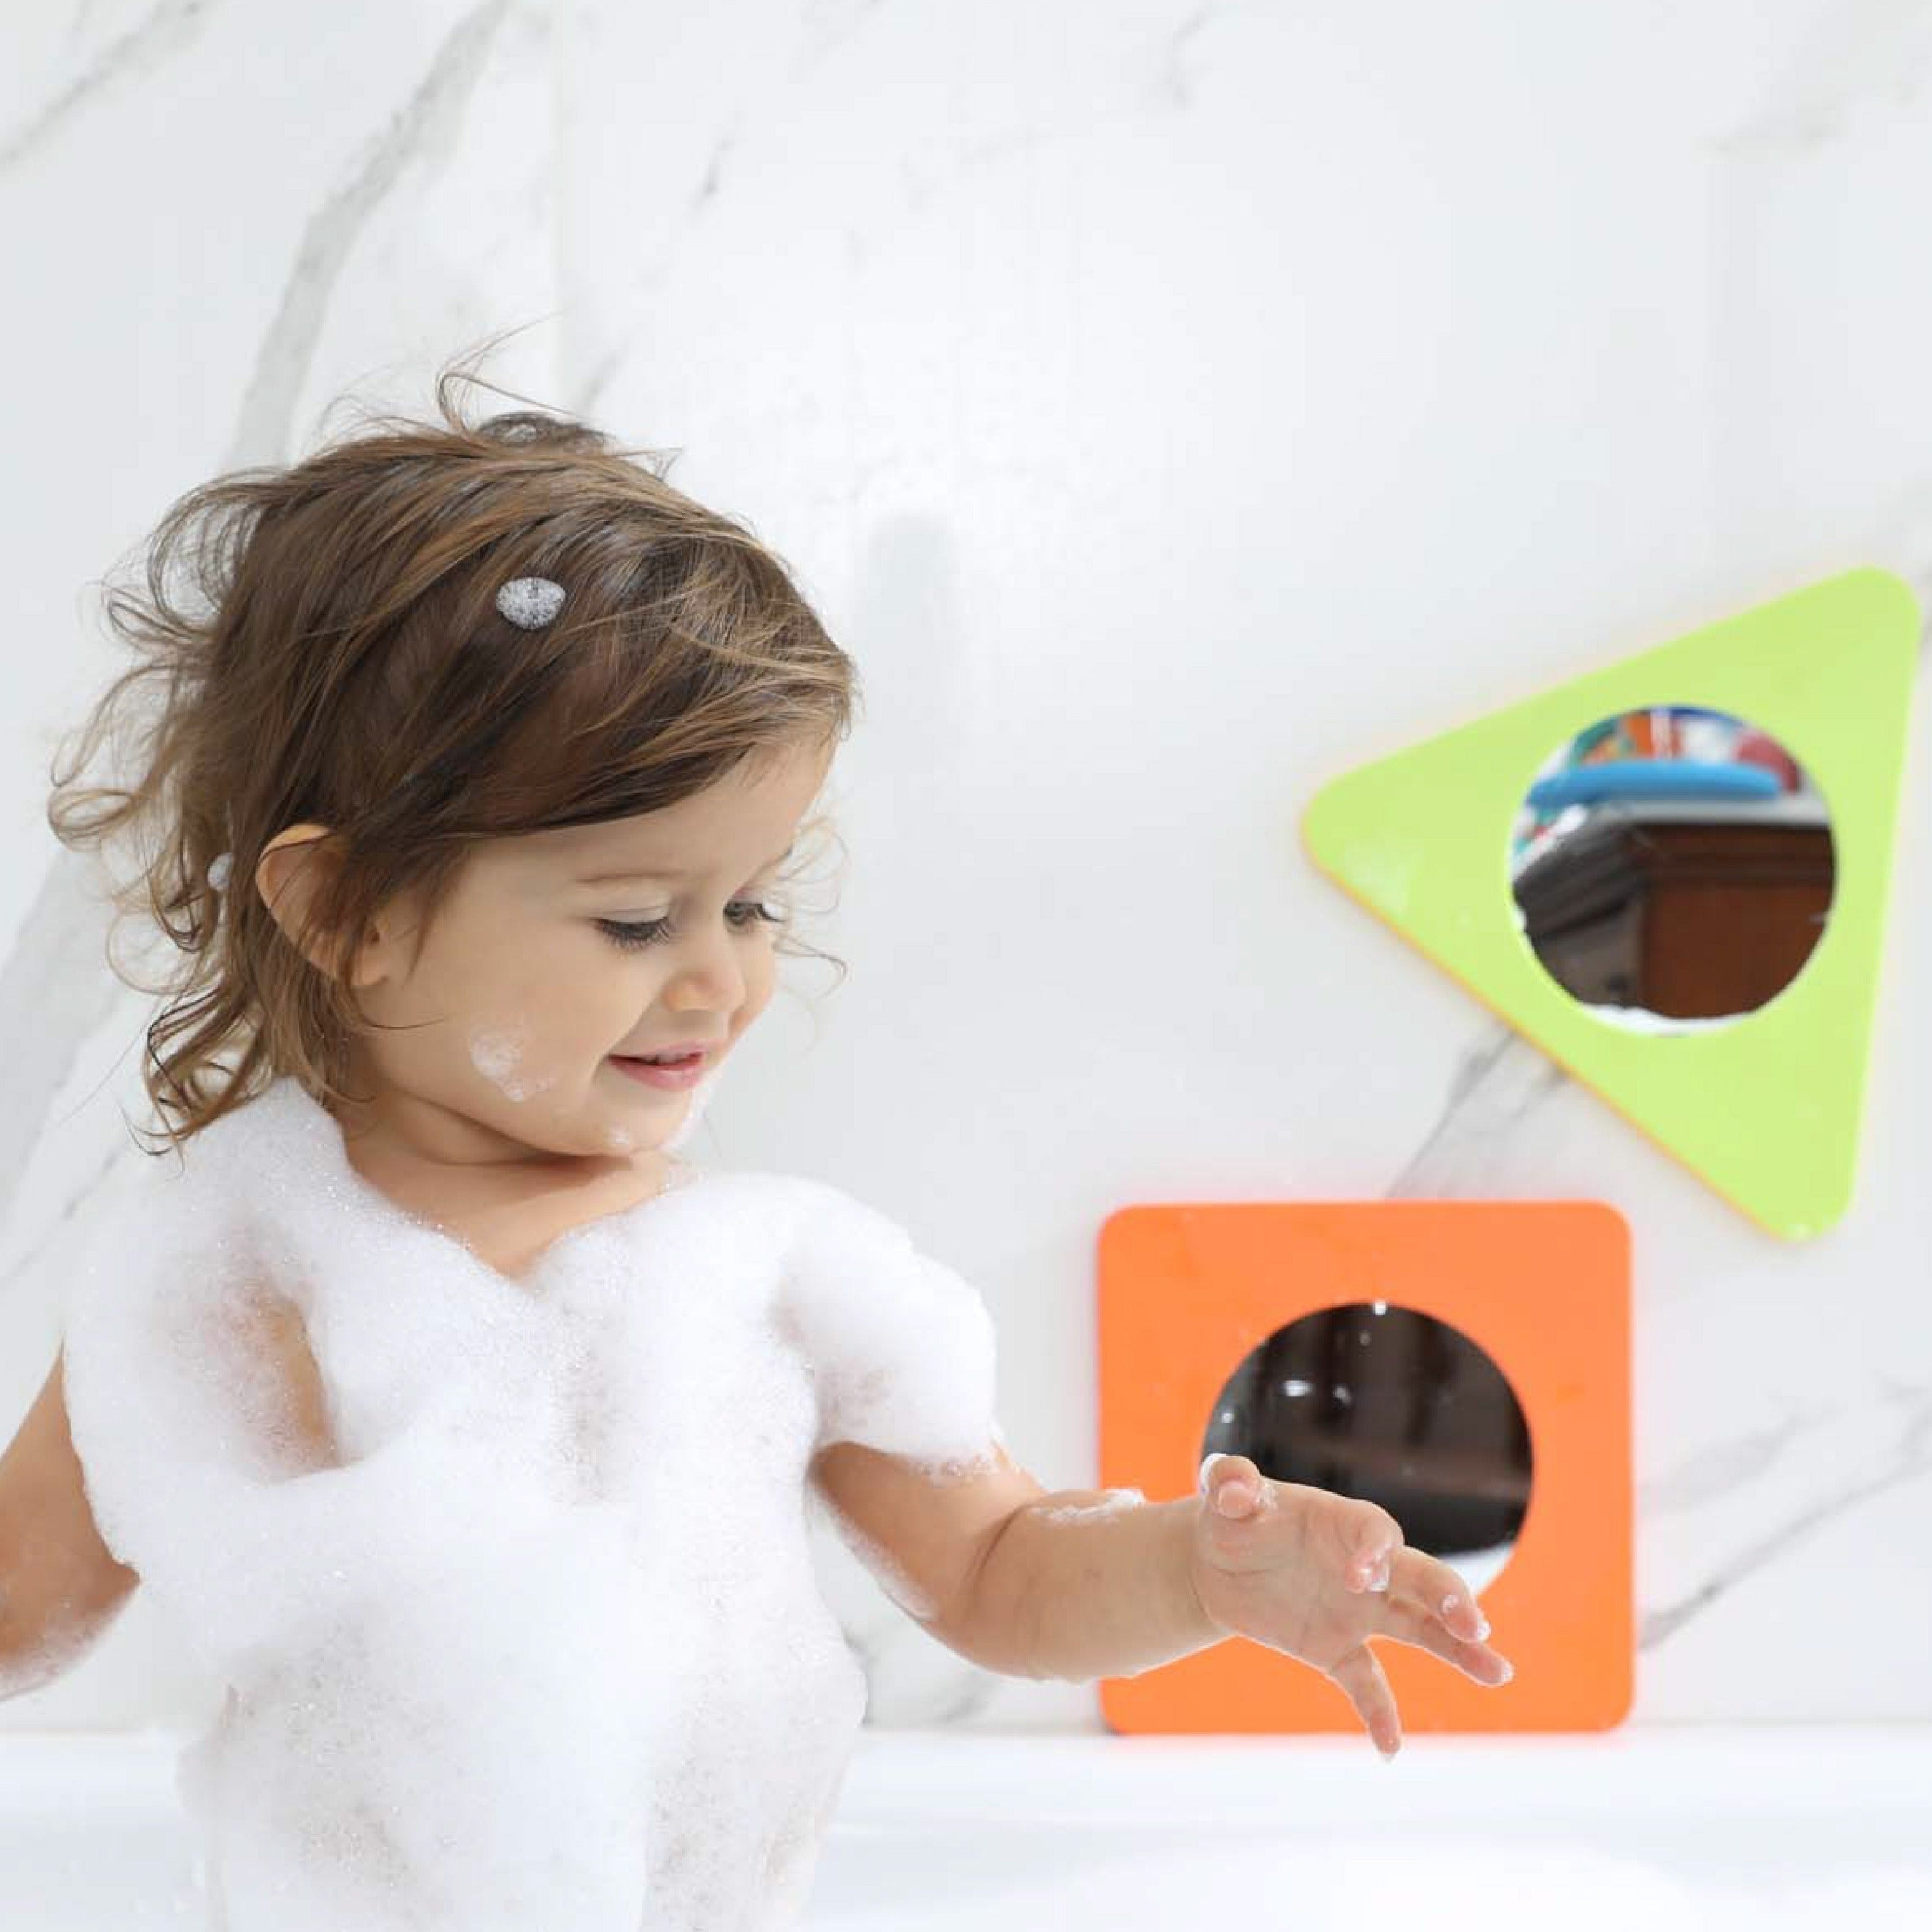 Bath Mirror Shapes, Looking for a fun and educational bath time activity for your little ones? Look no further than these Bath Mirror Shapes from Edufoam! Featuring three brightly coloured mirrors in triangle, circle, and square shapes, these toys are designed specifically for water play and will stick to any smooth, flat surface when wet.Made from Edufoam, these mirrors are incredibly durable and resistant to mould and mildew. They won't absorb water or become misshapen, ensuring that your child will enjoy